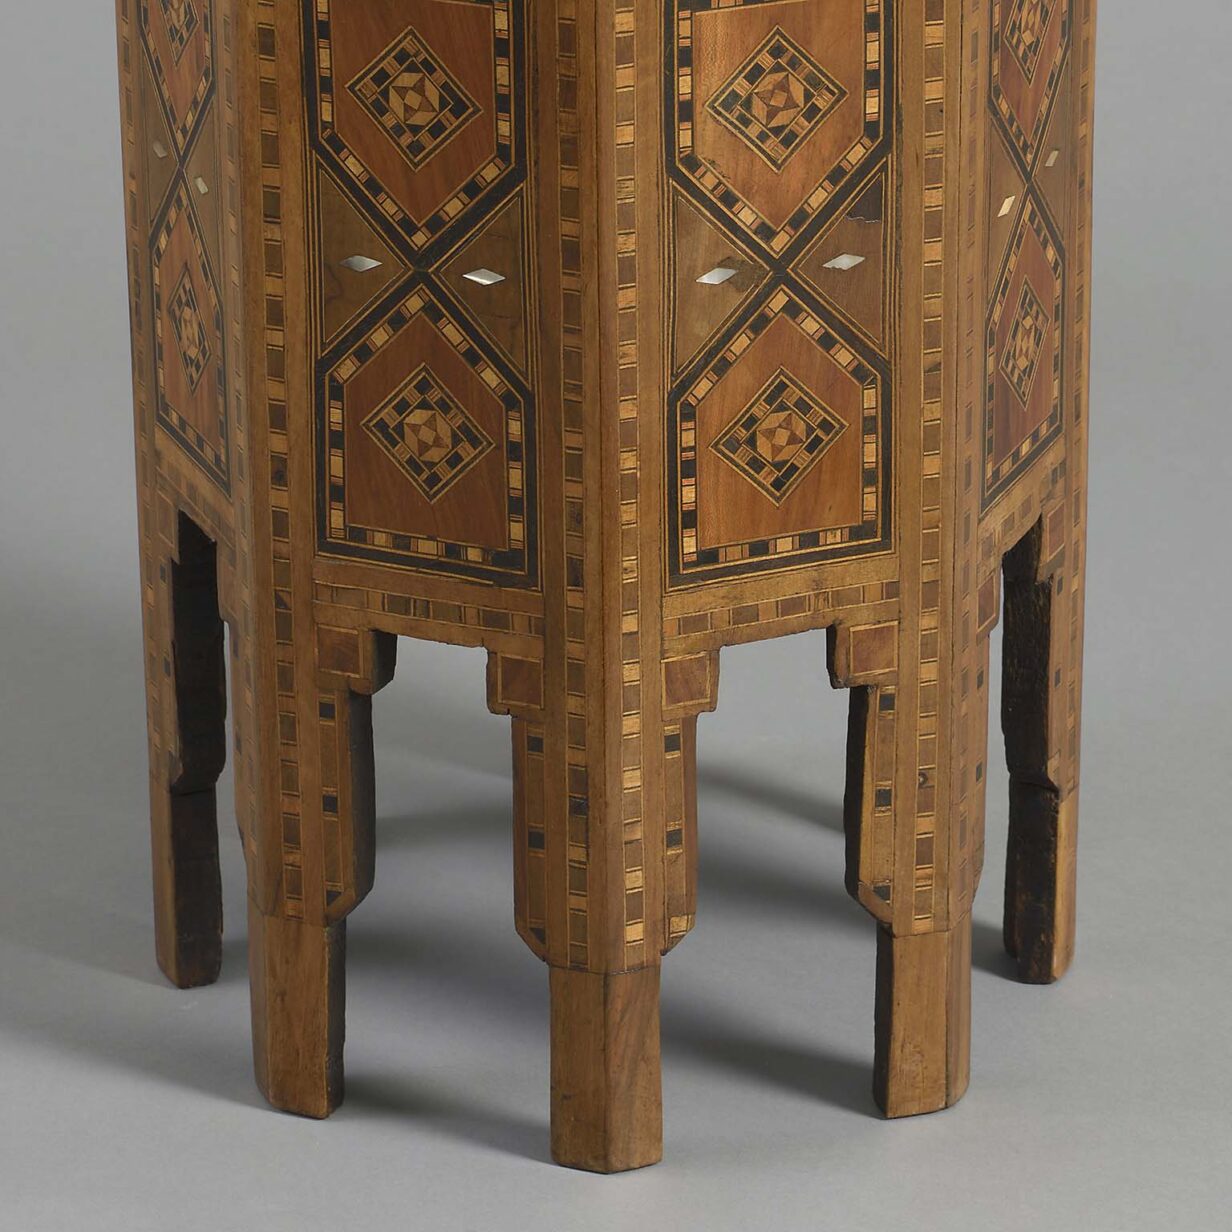 Early 20th century inlaid occasional table